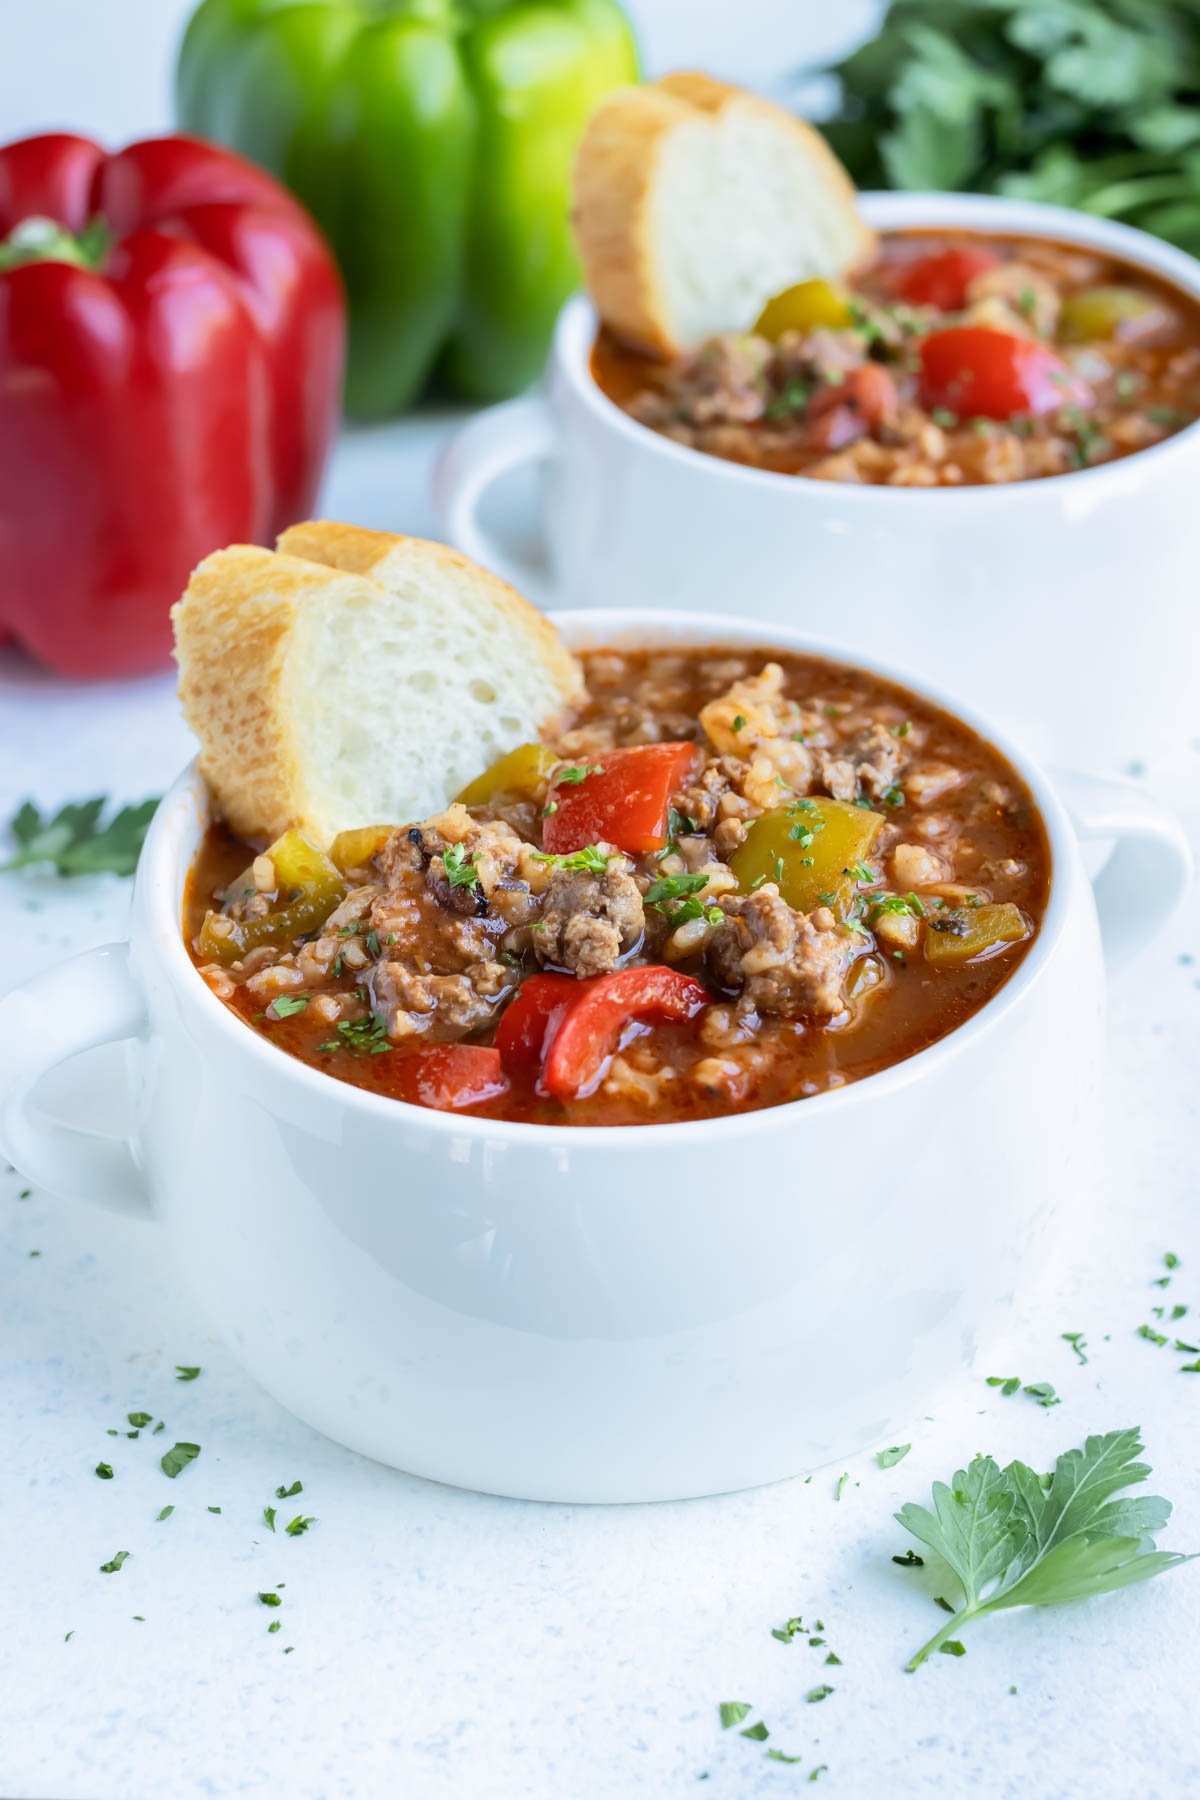 Bread is served with this hearty bell pepper soup.